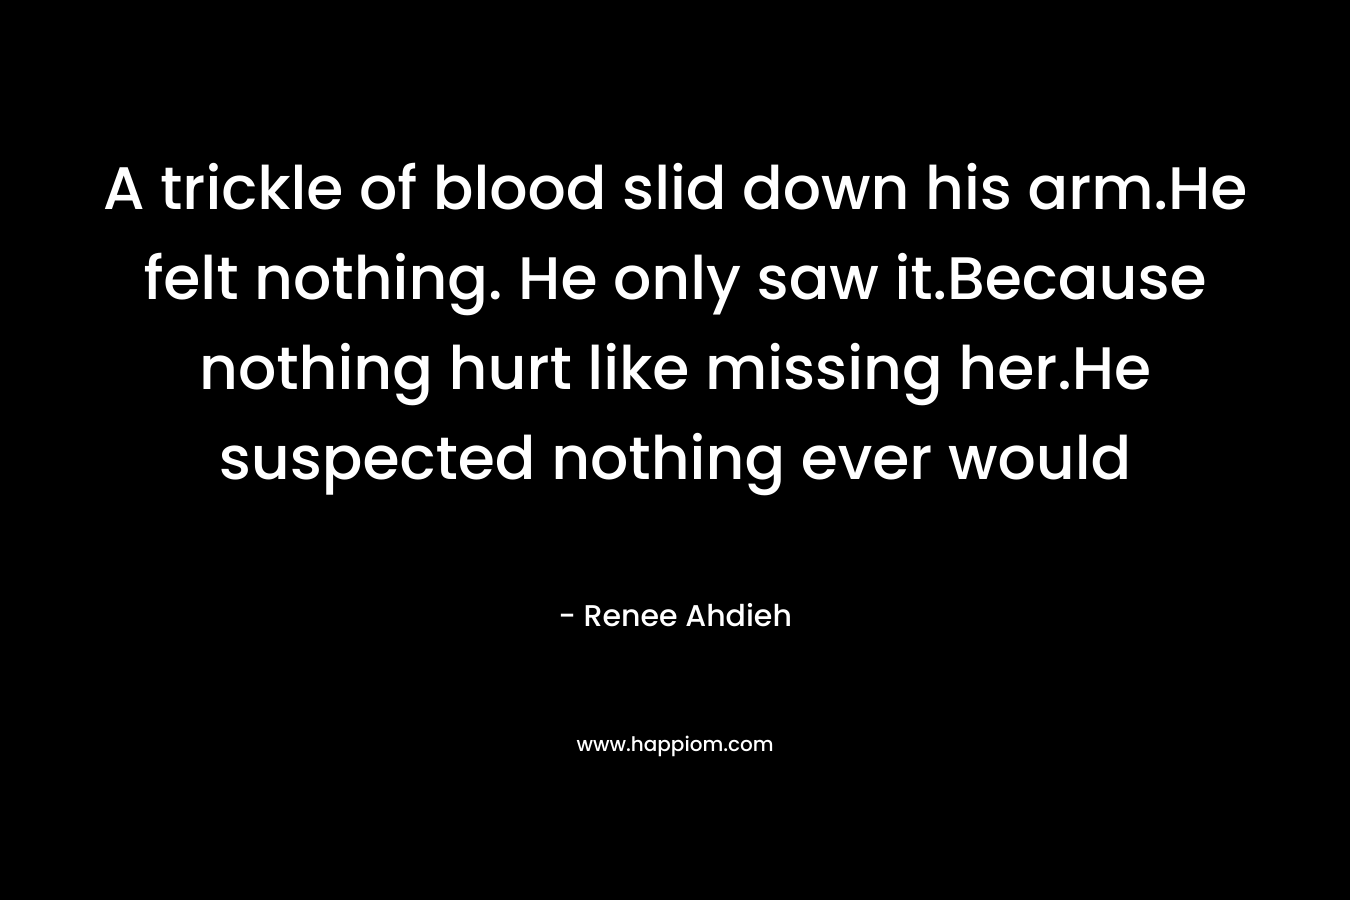 A trickle of blood slid down his arm.He felt nothing. He only saw it.Because nothing hurt like missing her.He suspected nothing ever would – Renee Ahdieh